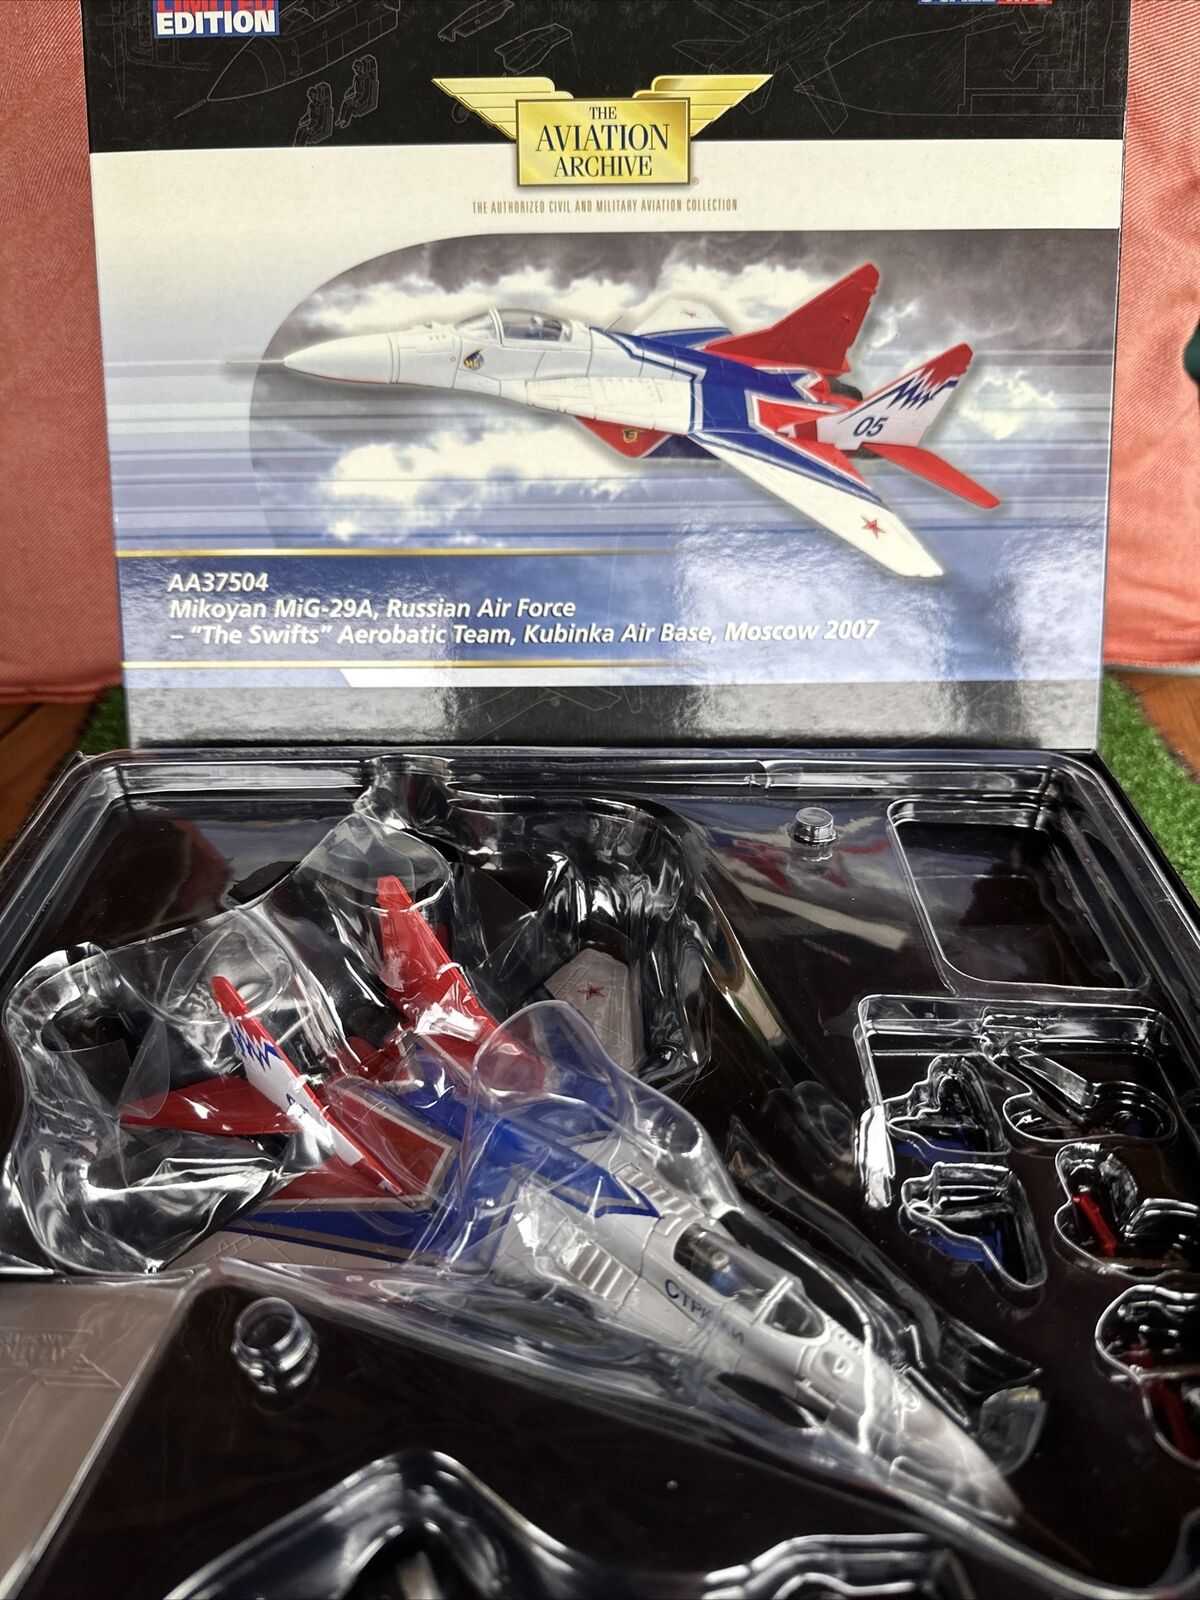 Corgi Mikoyan Mig-29A Russian AF “The Swifts” 2007 - Limited Edition AA37504